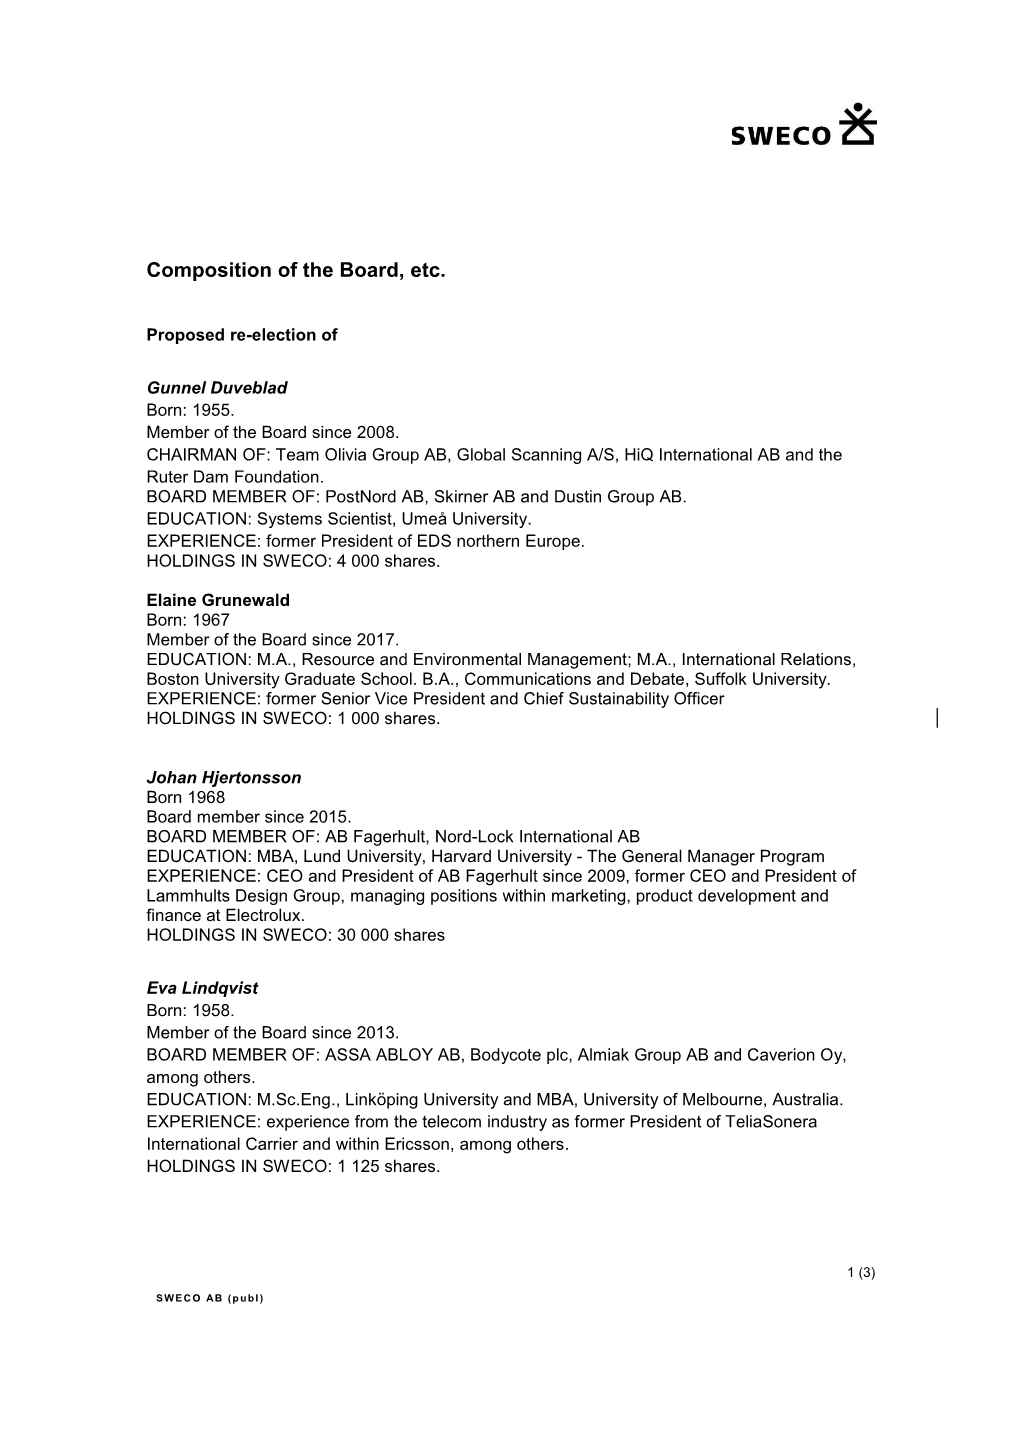 Item 12 – Amended Nomination Committee Composition of the Board 2018